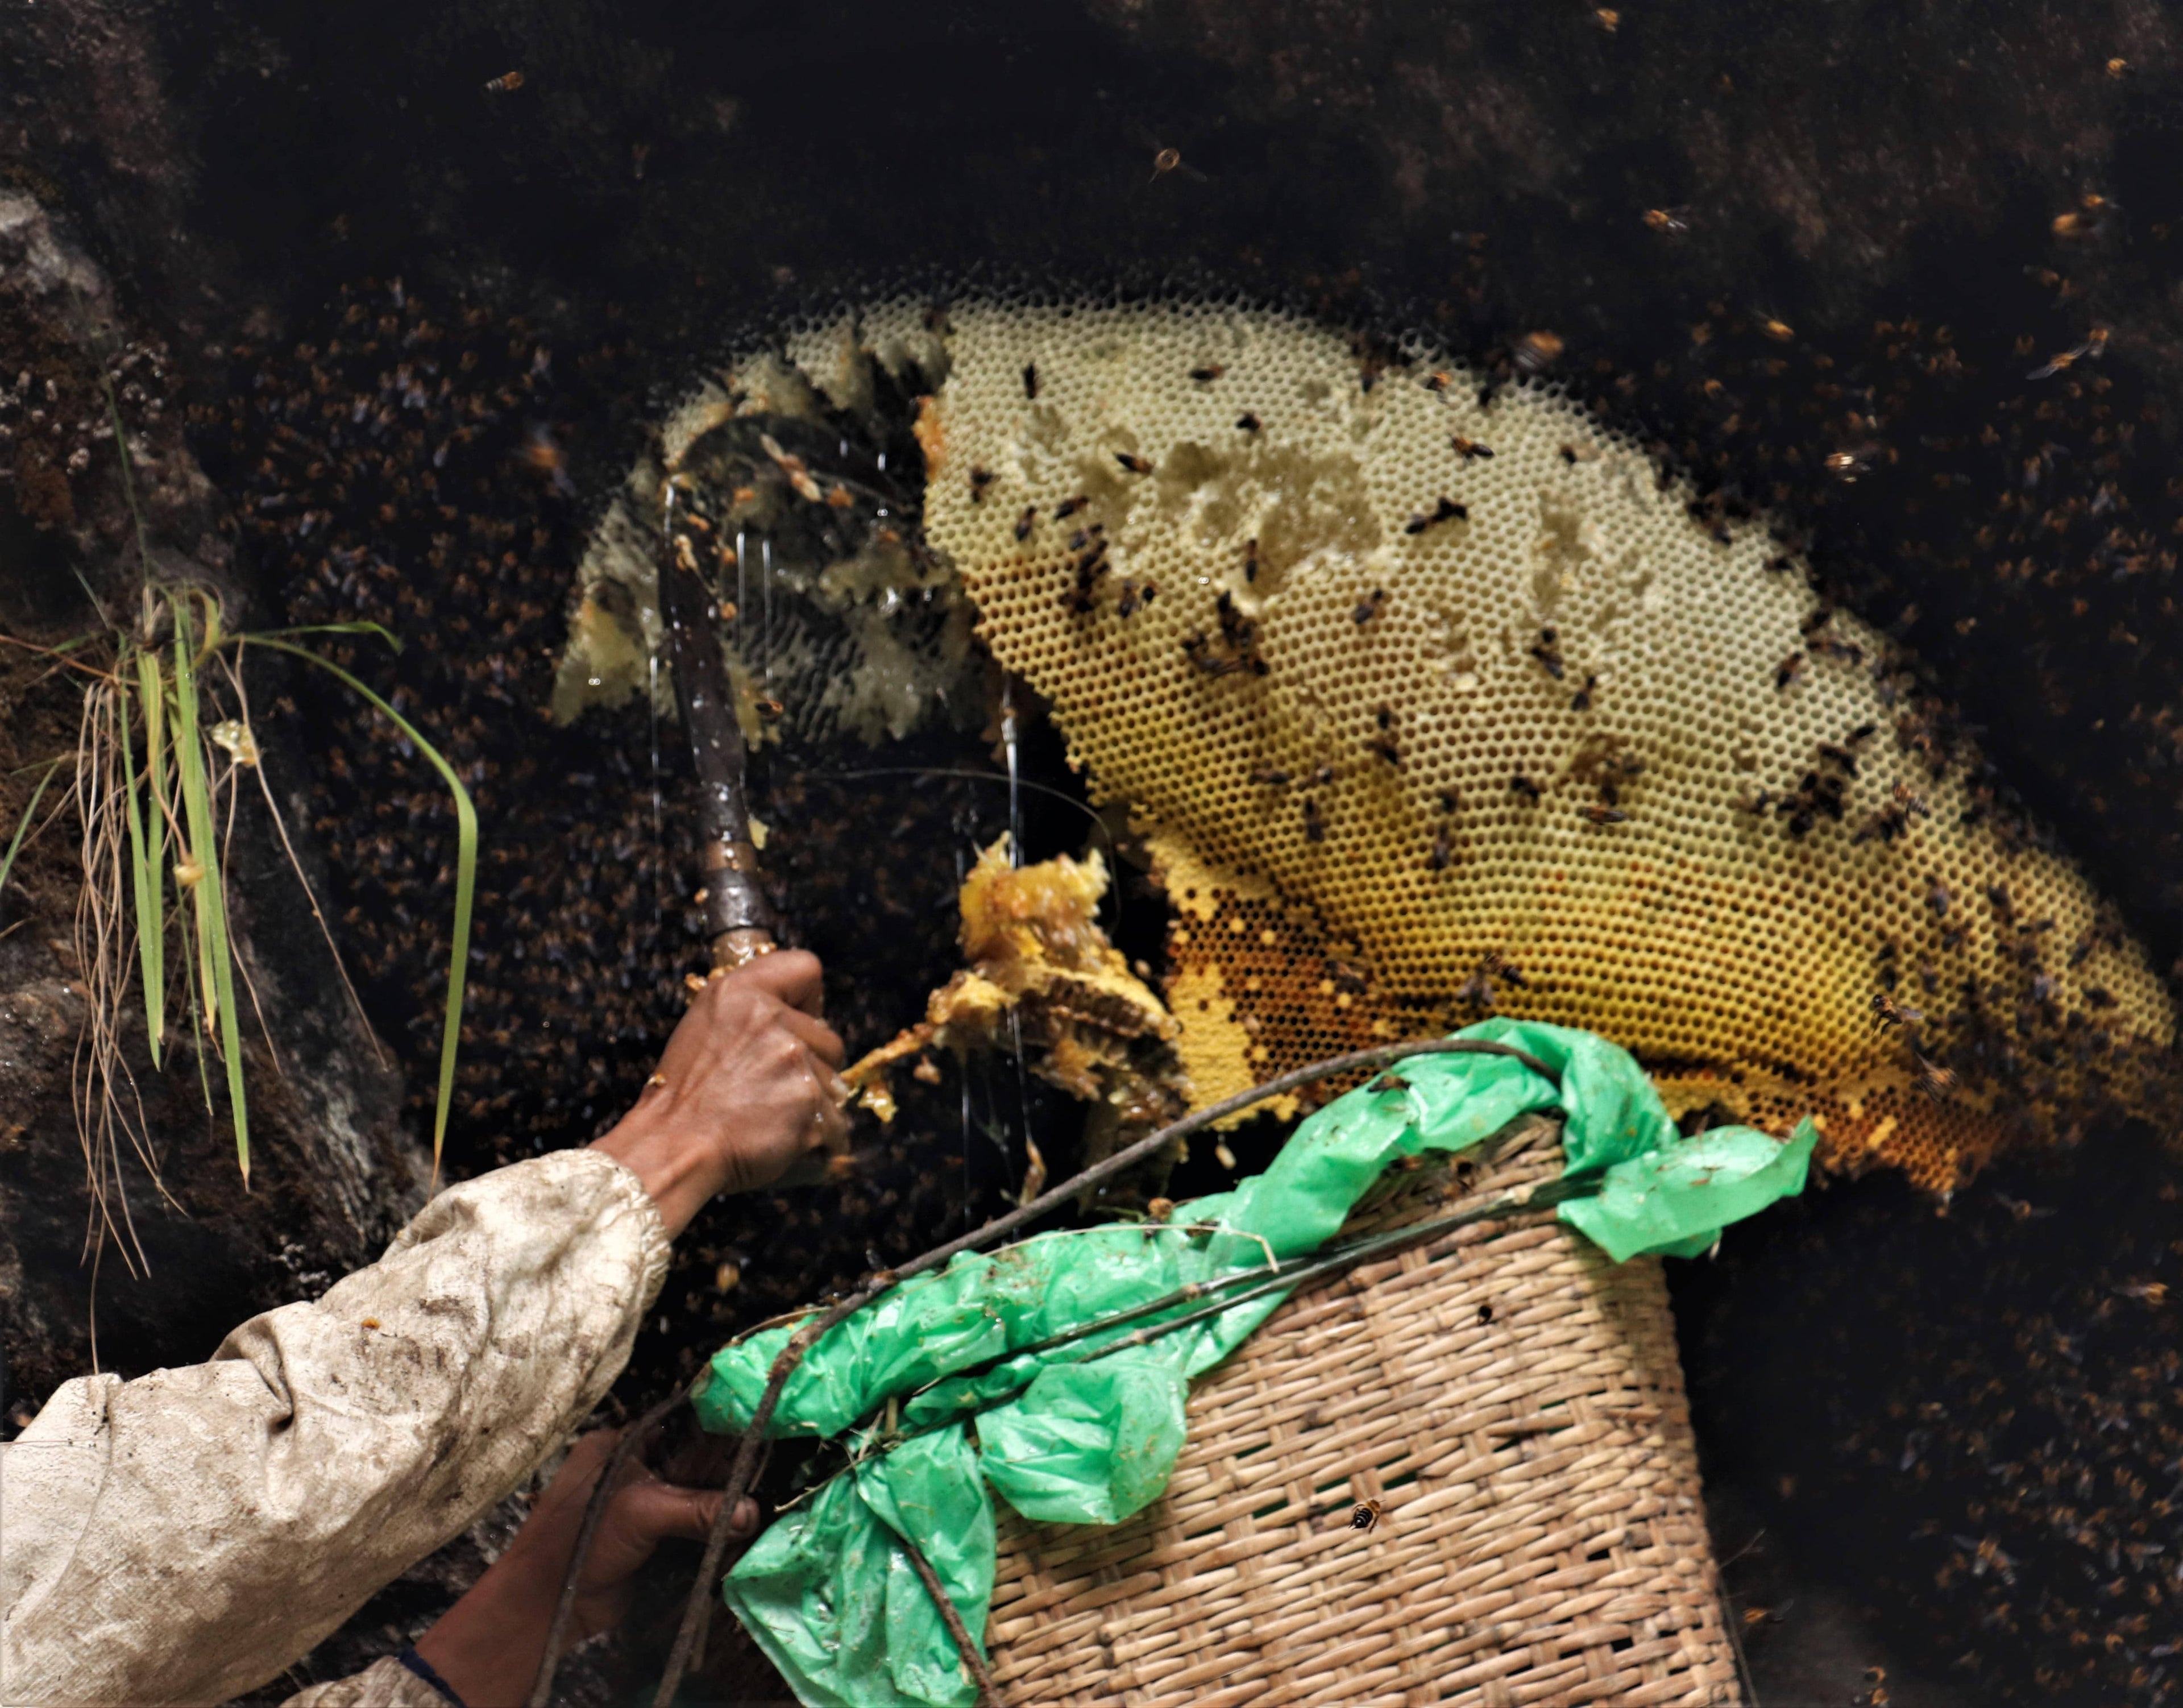 Man harvesting honey from large beehive